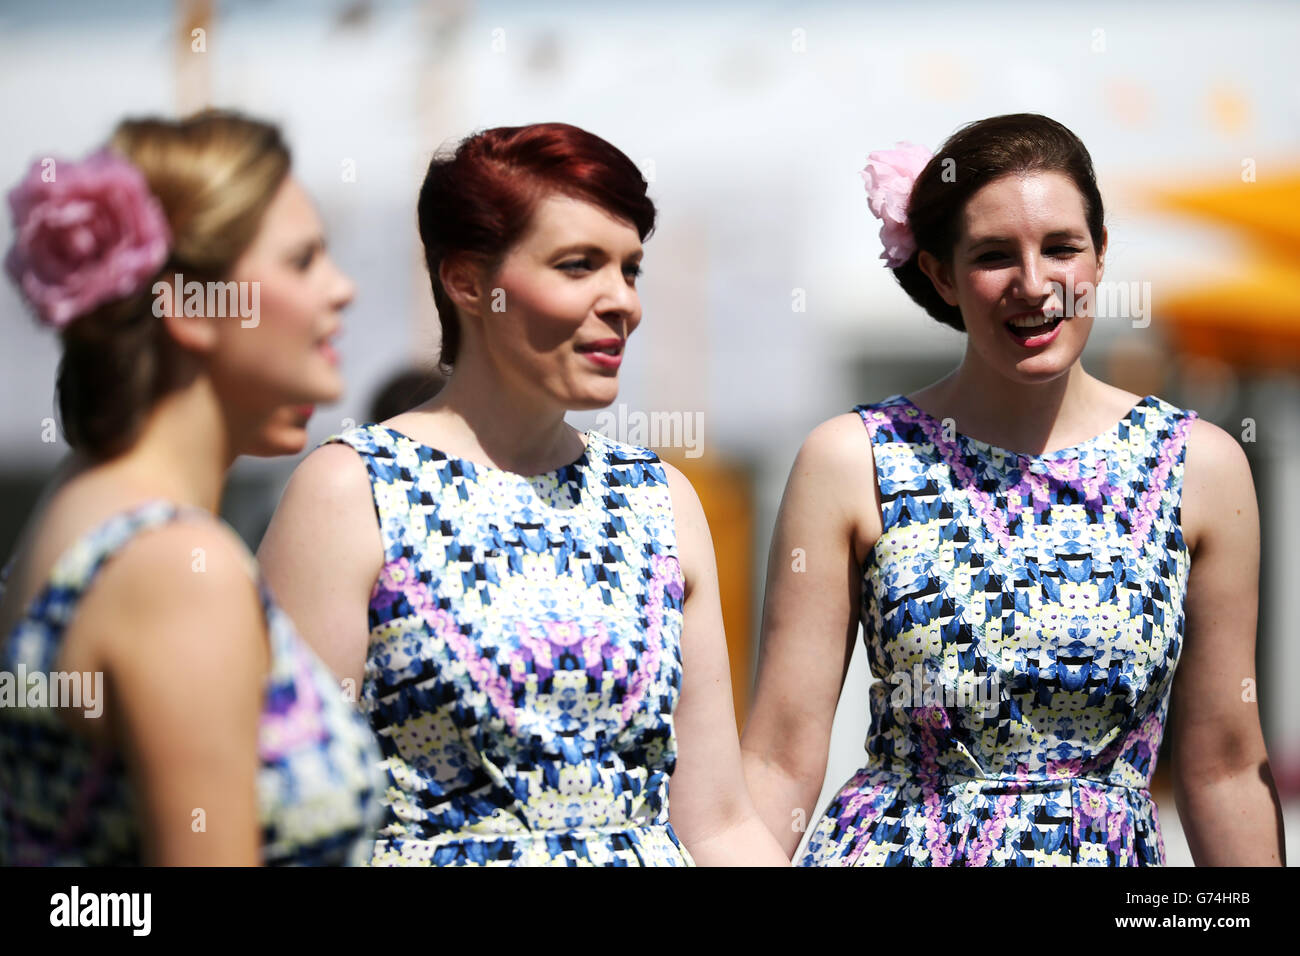 Horse Racing - Investec Ladies Day 2014 - Epsom Downs Racecourse. Singers entertain the crowds on Ladies Day at Epsom Downs Racecourse Stock Photo